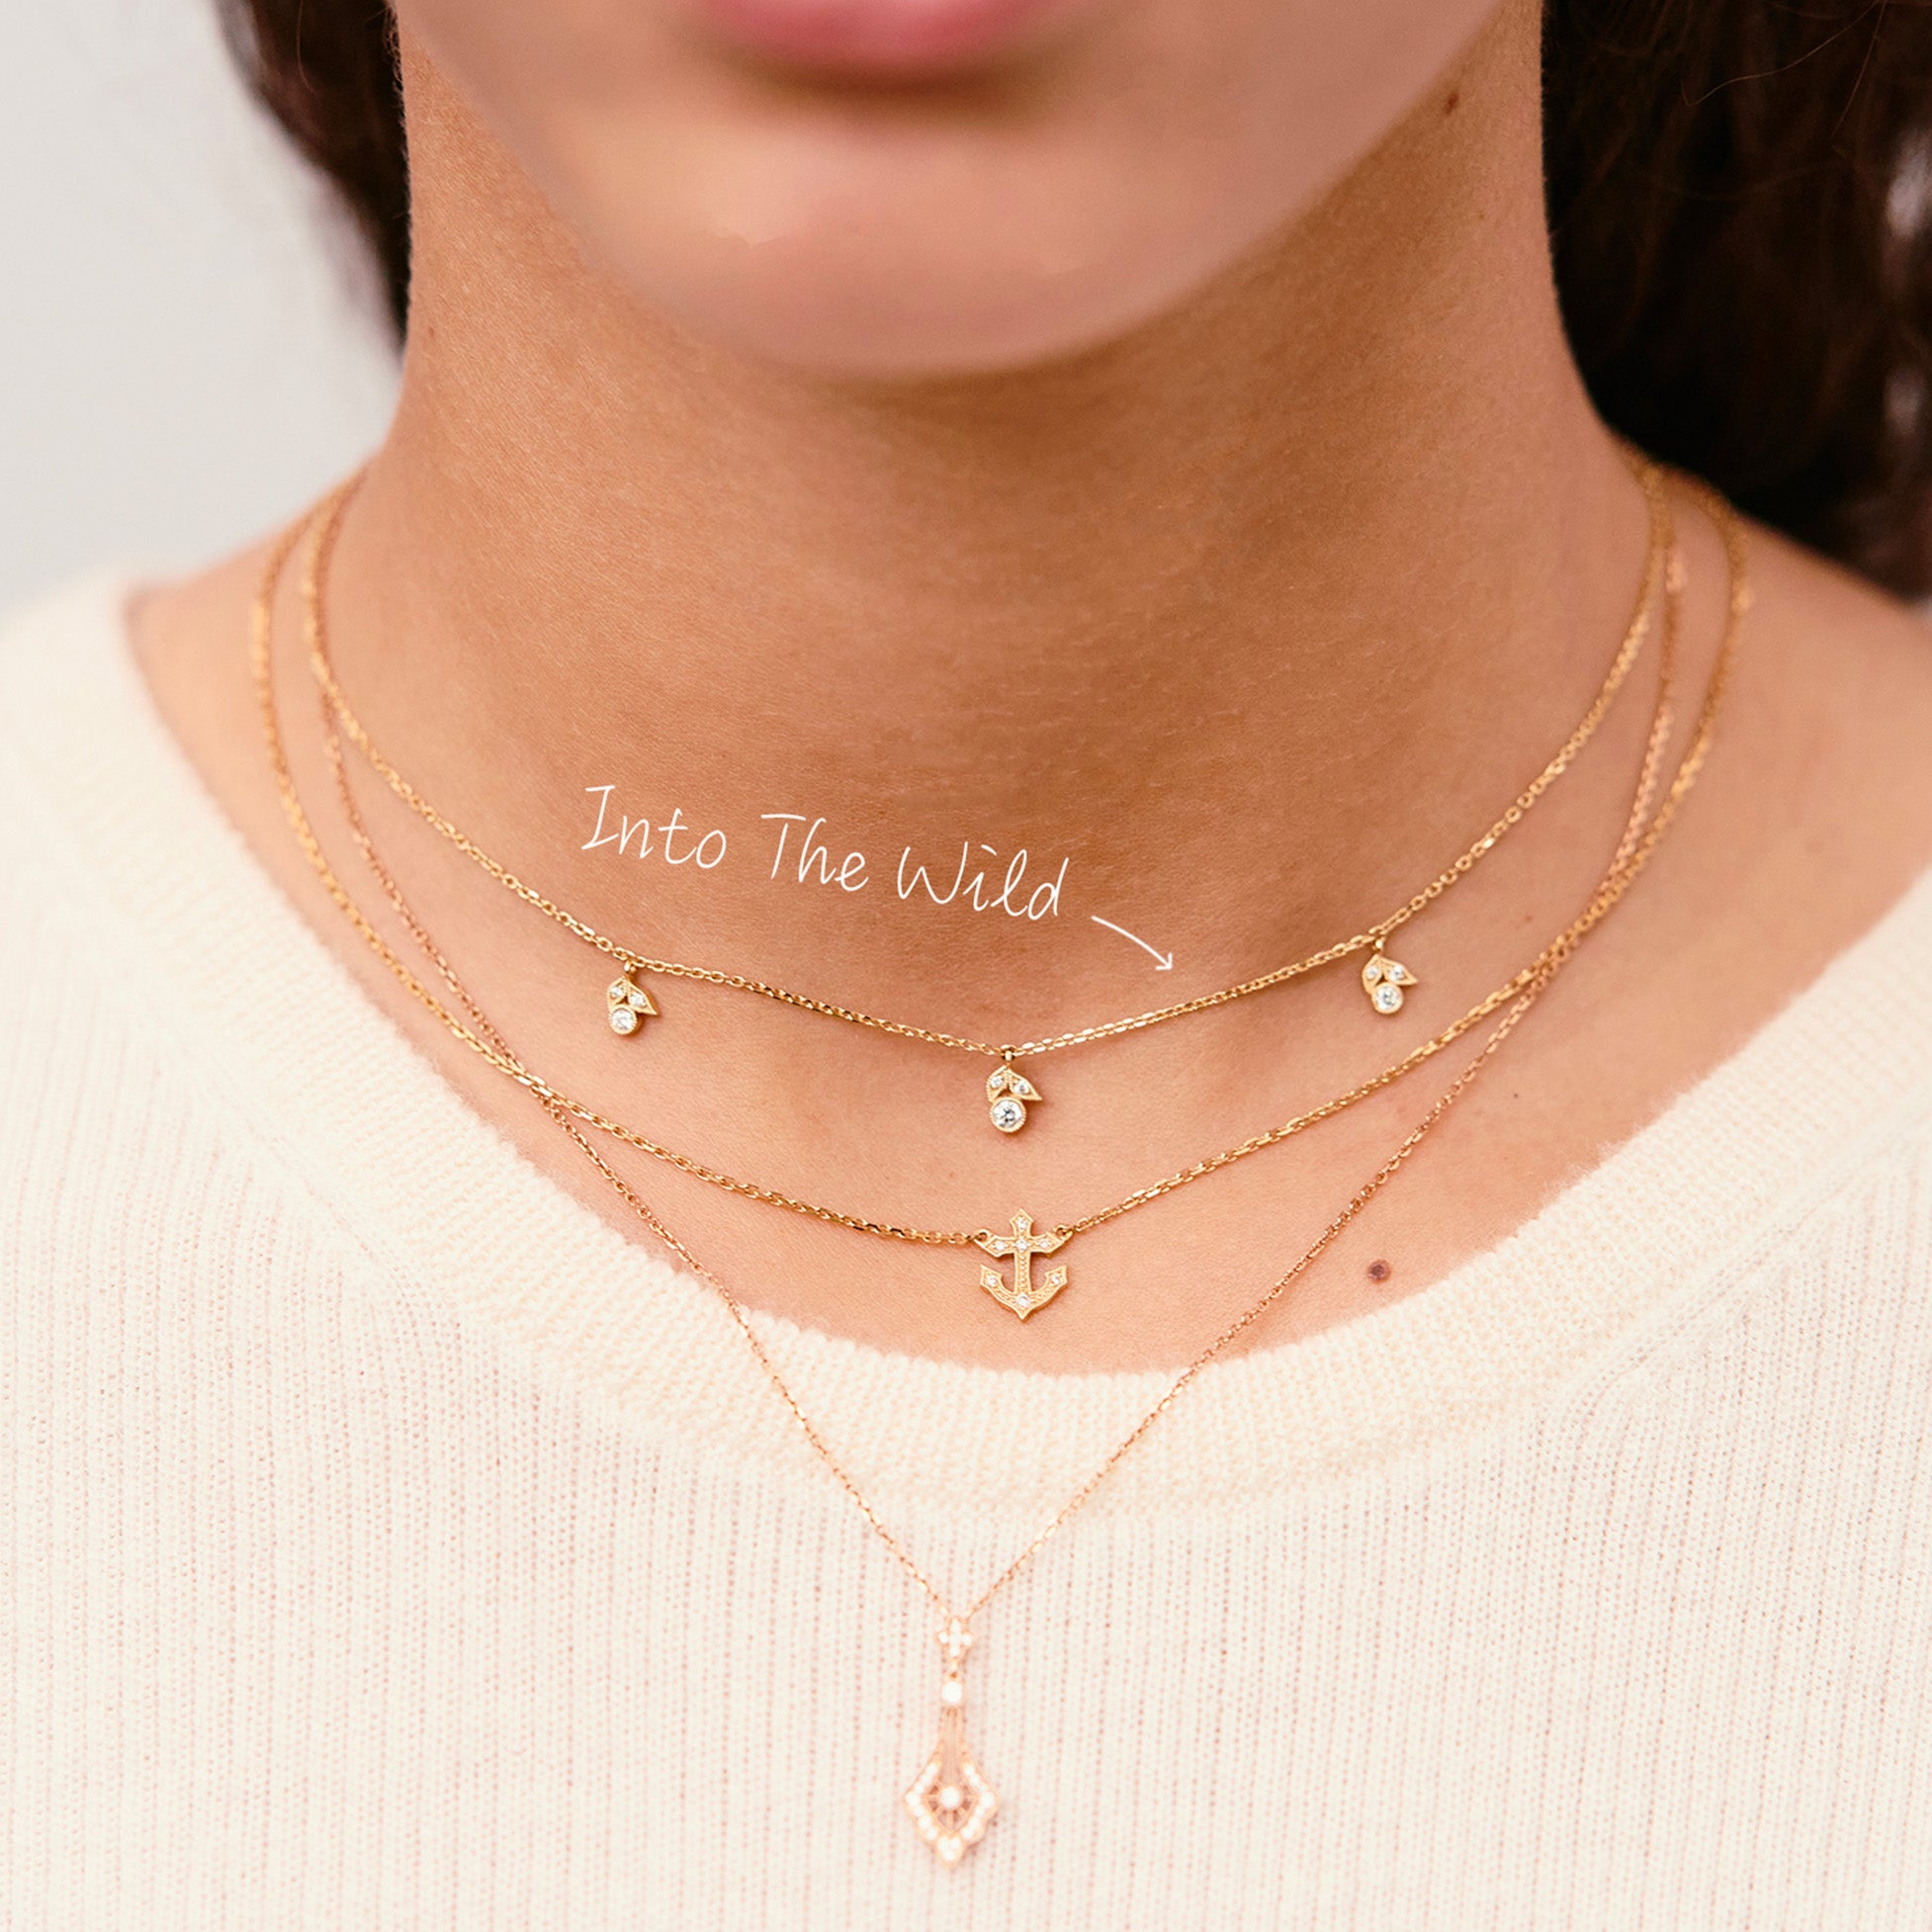 Collier - Into the wild